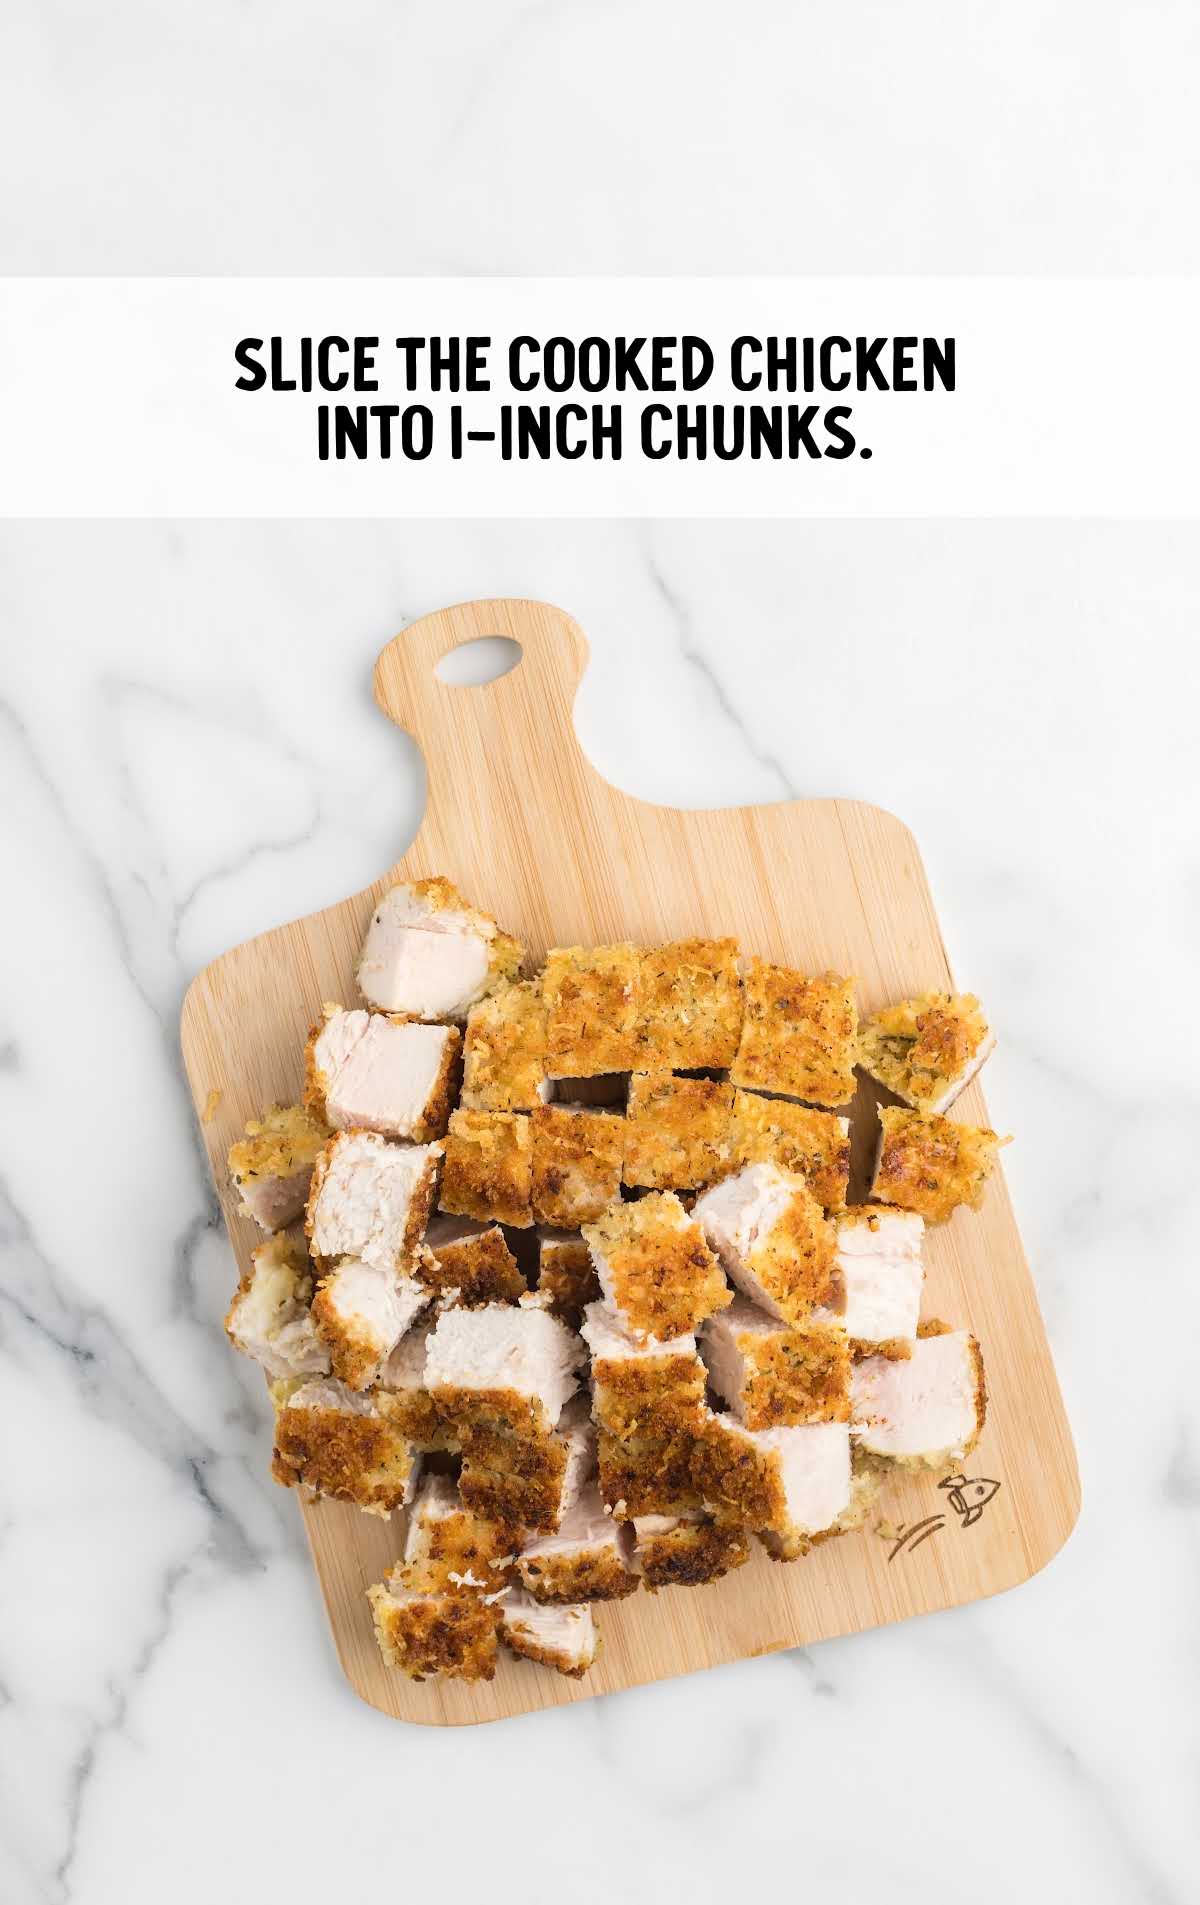 chicken sliced into 1 inch chunks on a wooden board